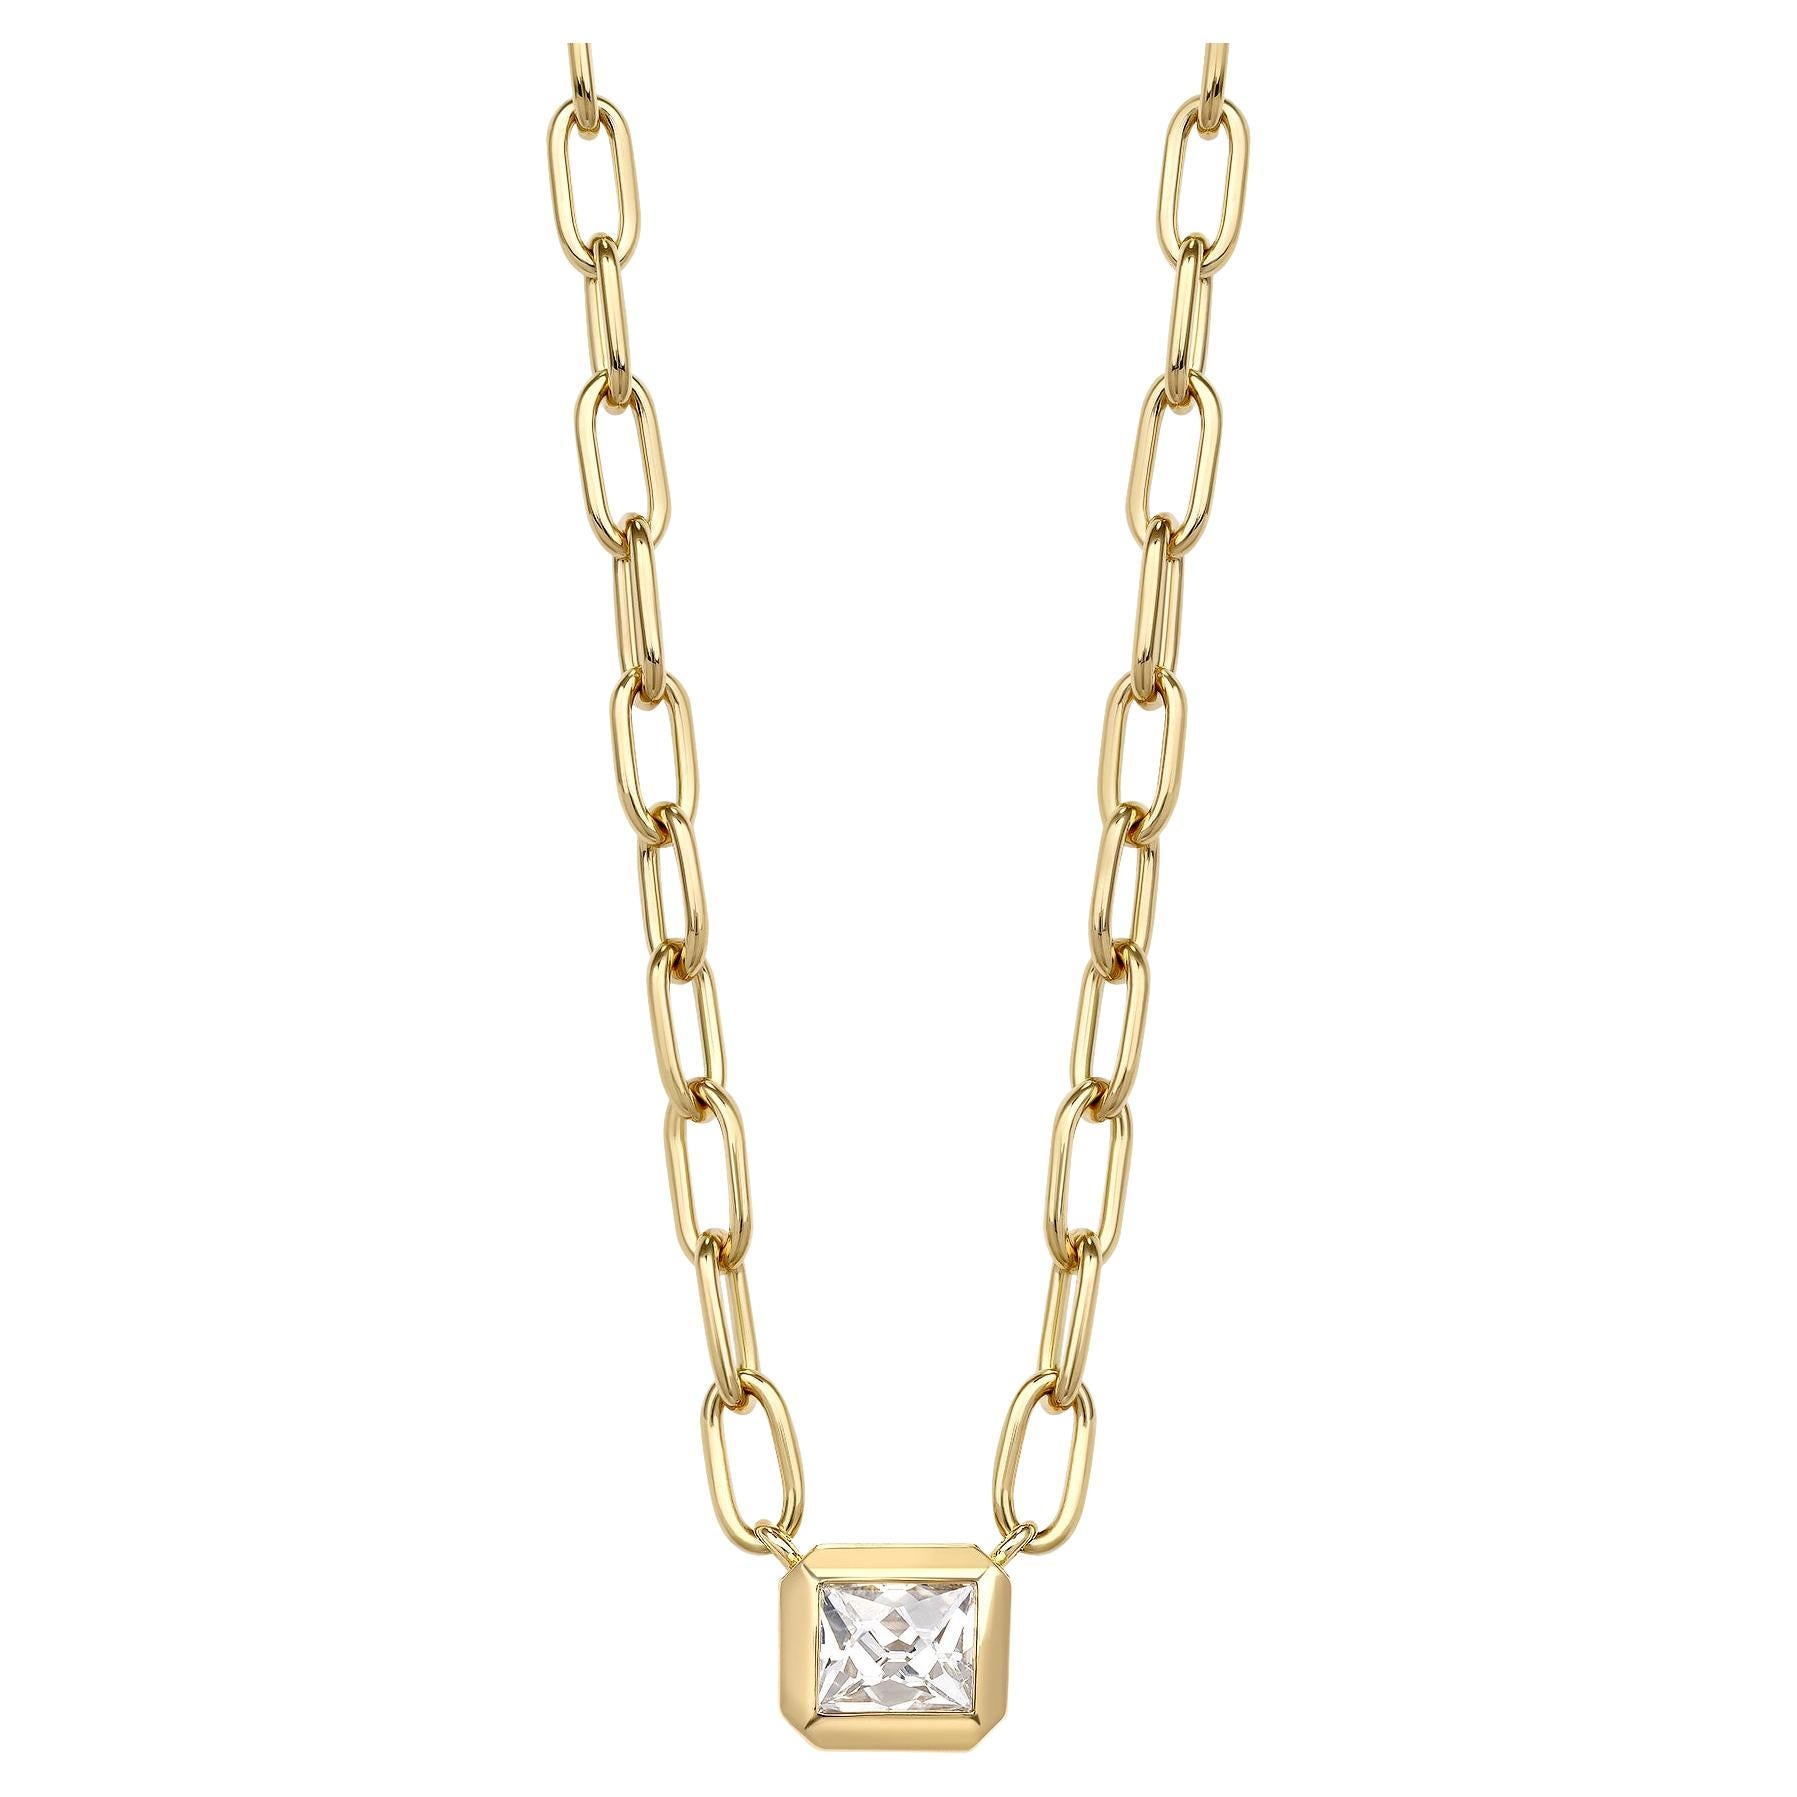 Handcrafted Karina French Cut Diamond Necklace by Single Stone For Sale